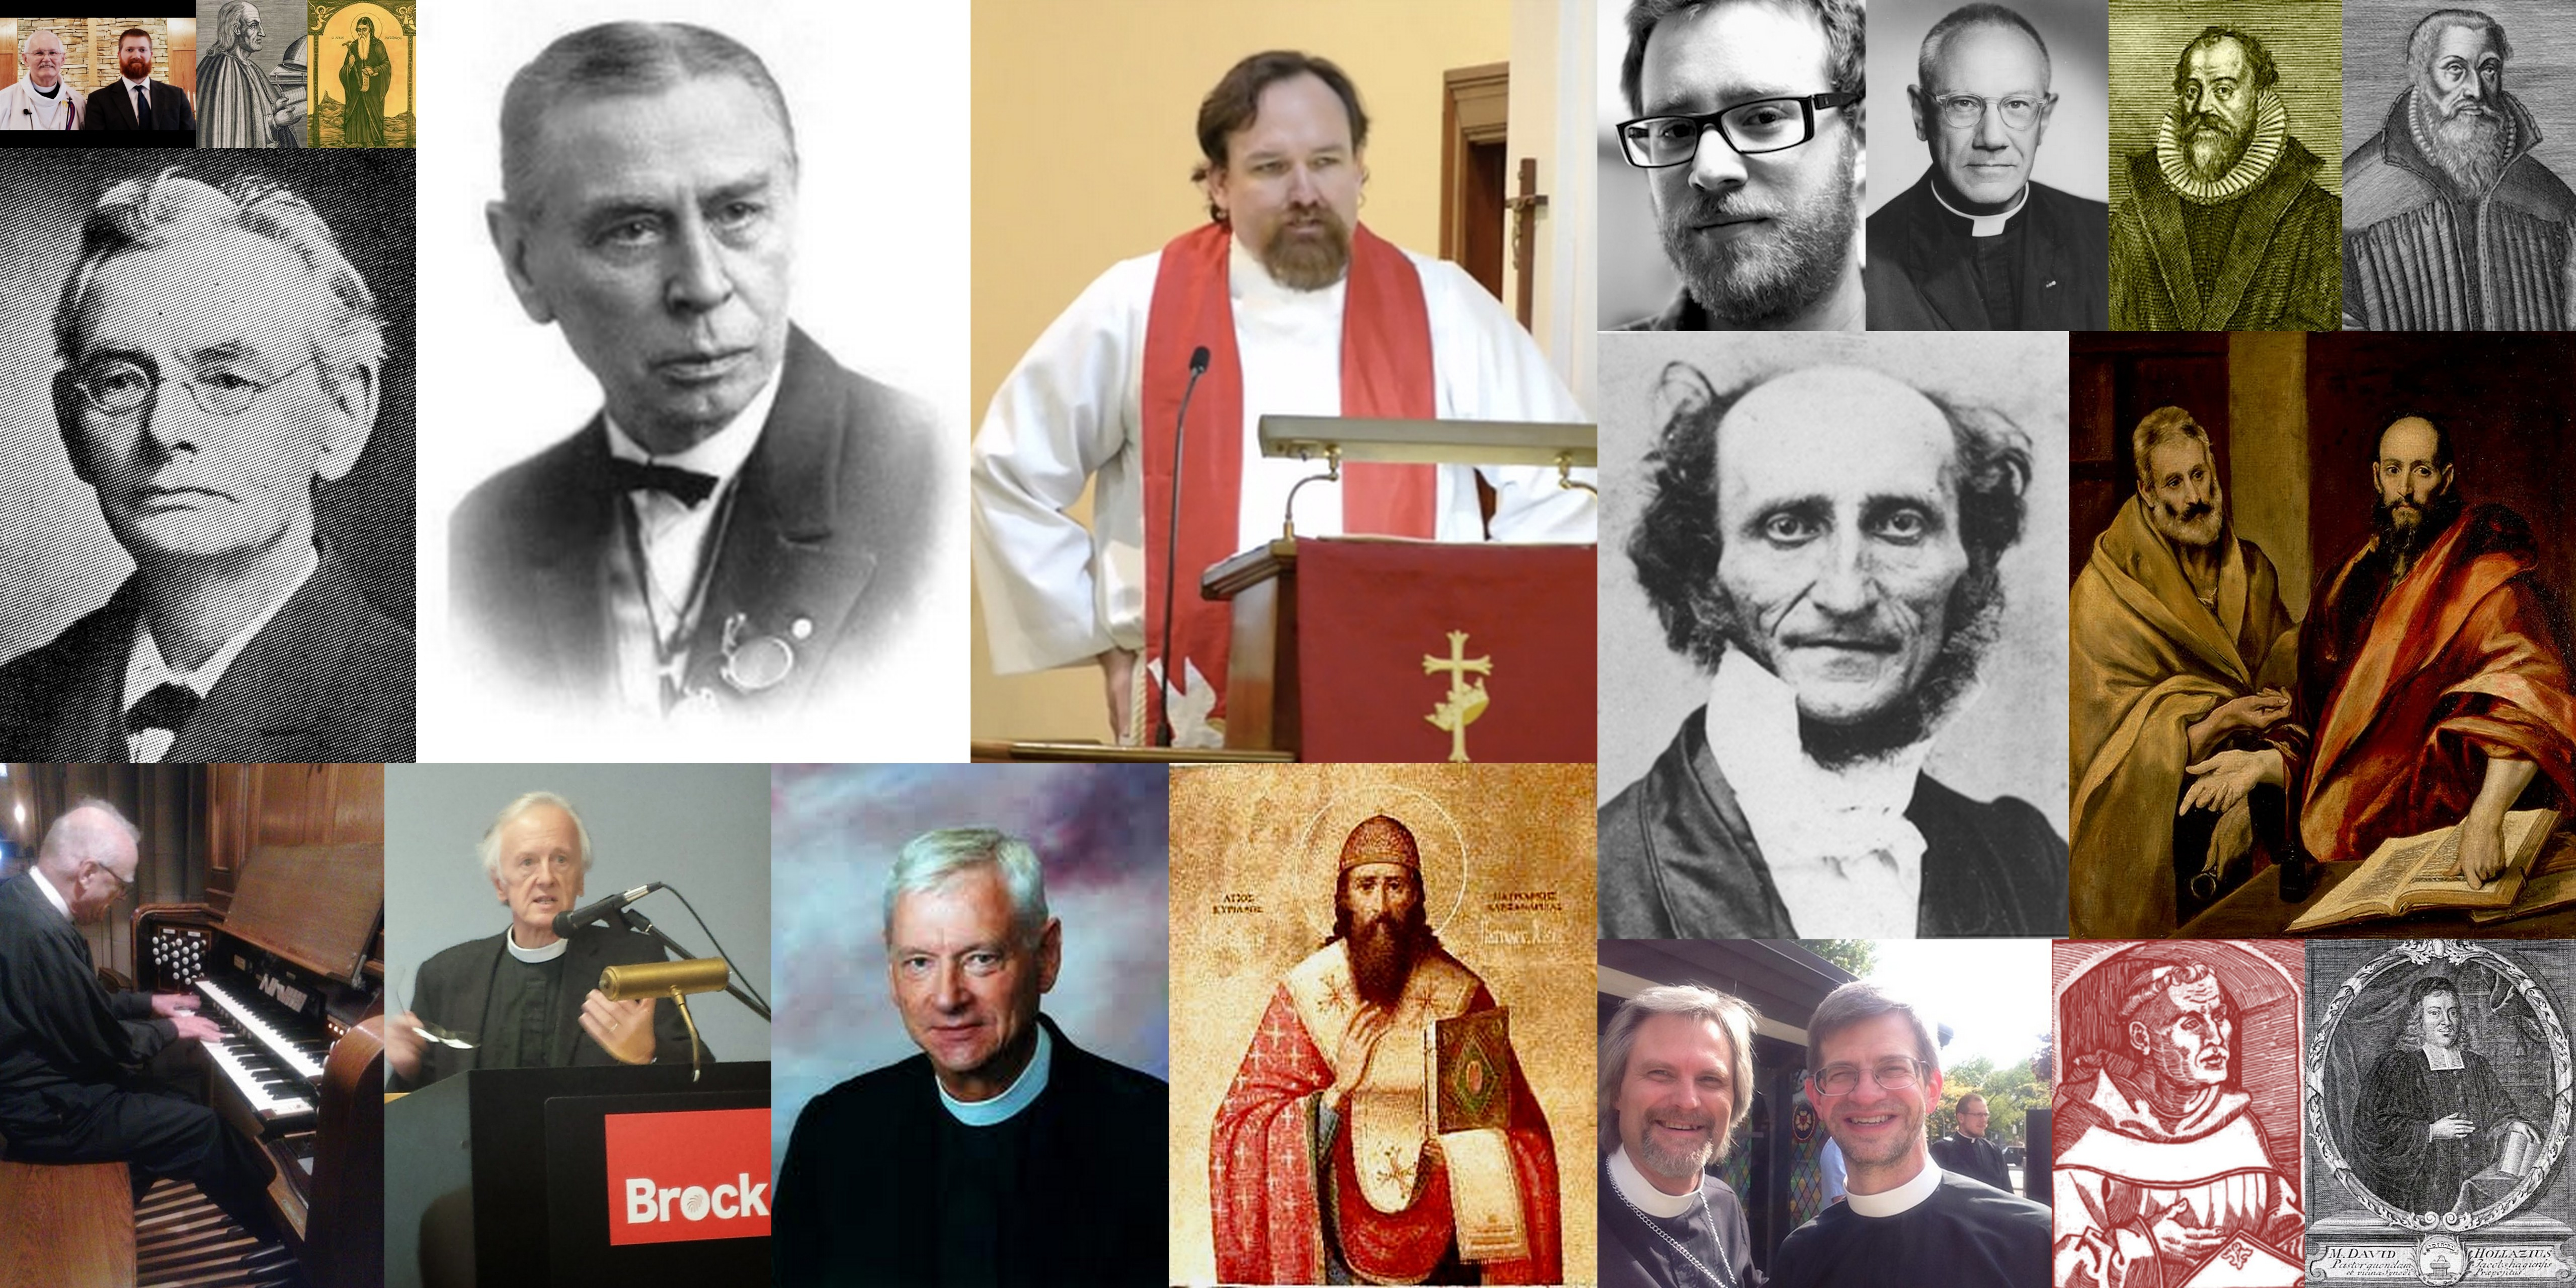 Lutheran soteriology